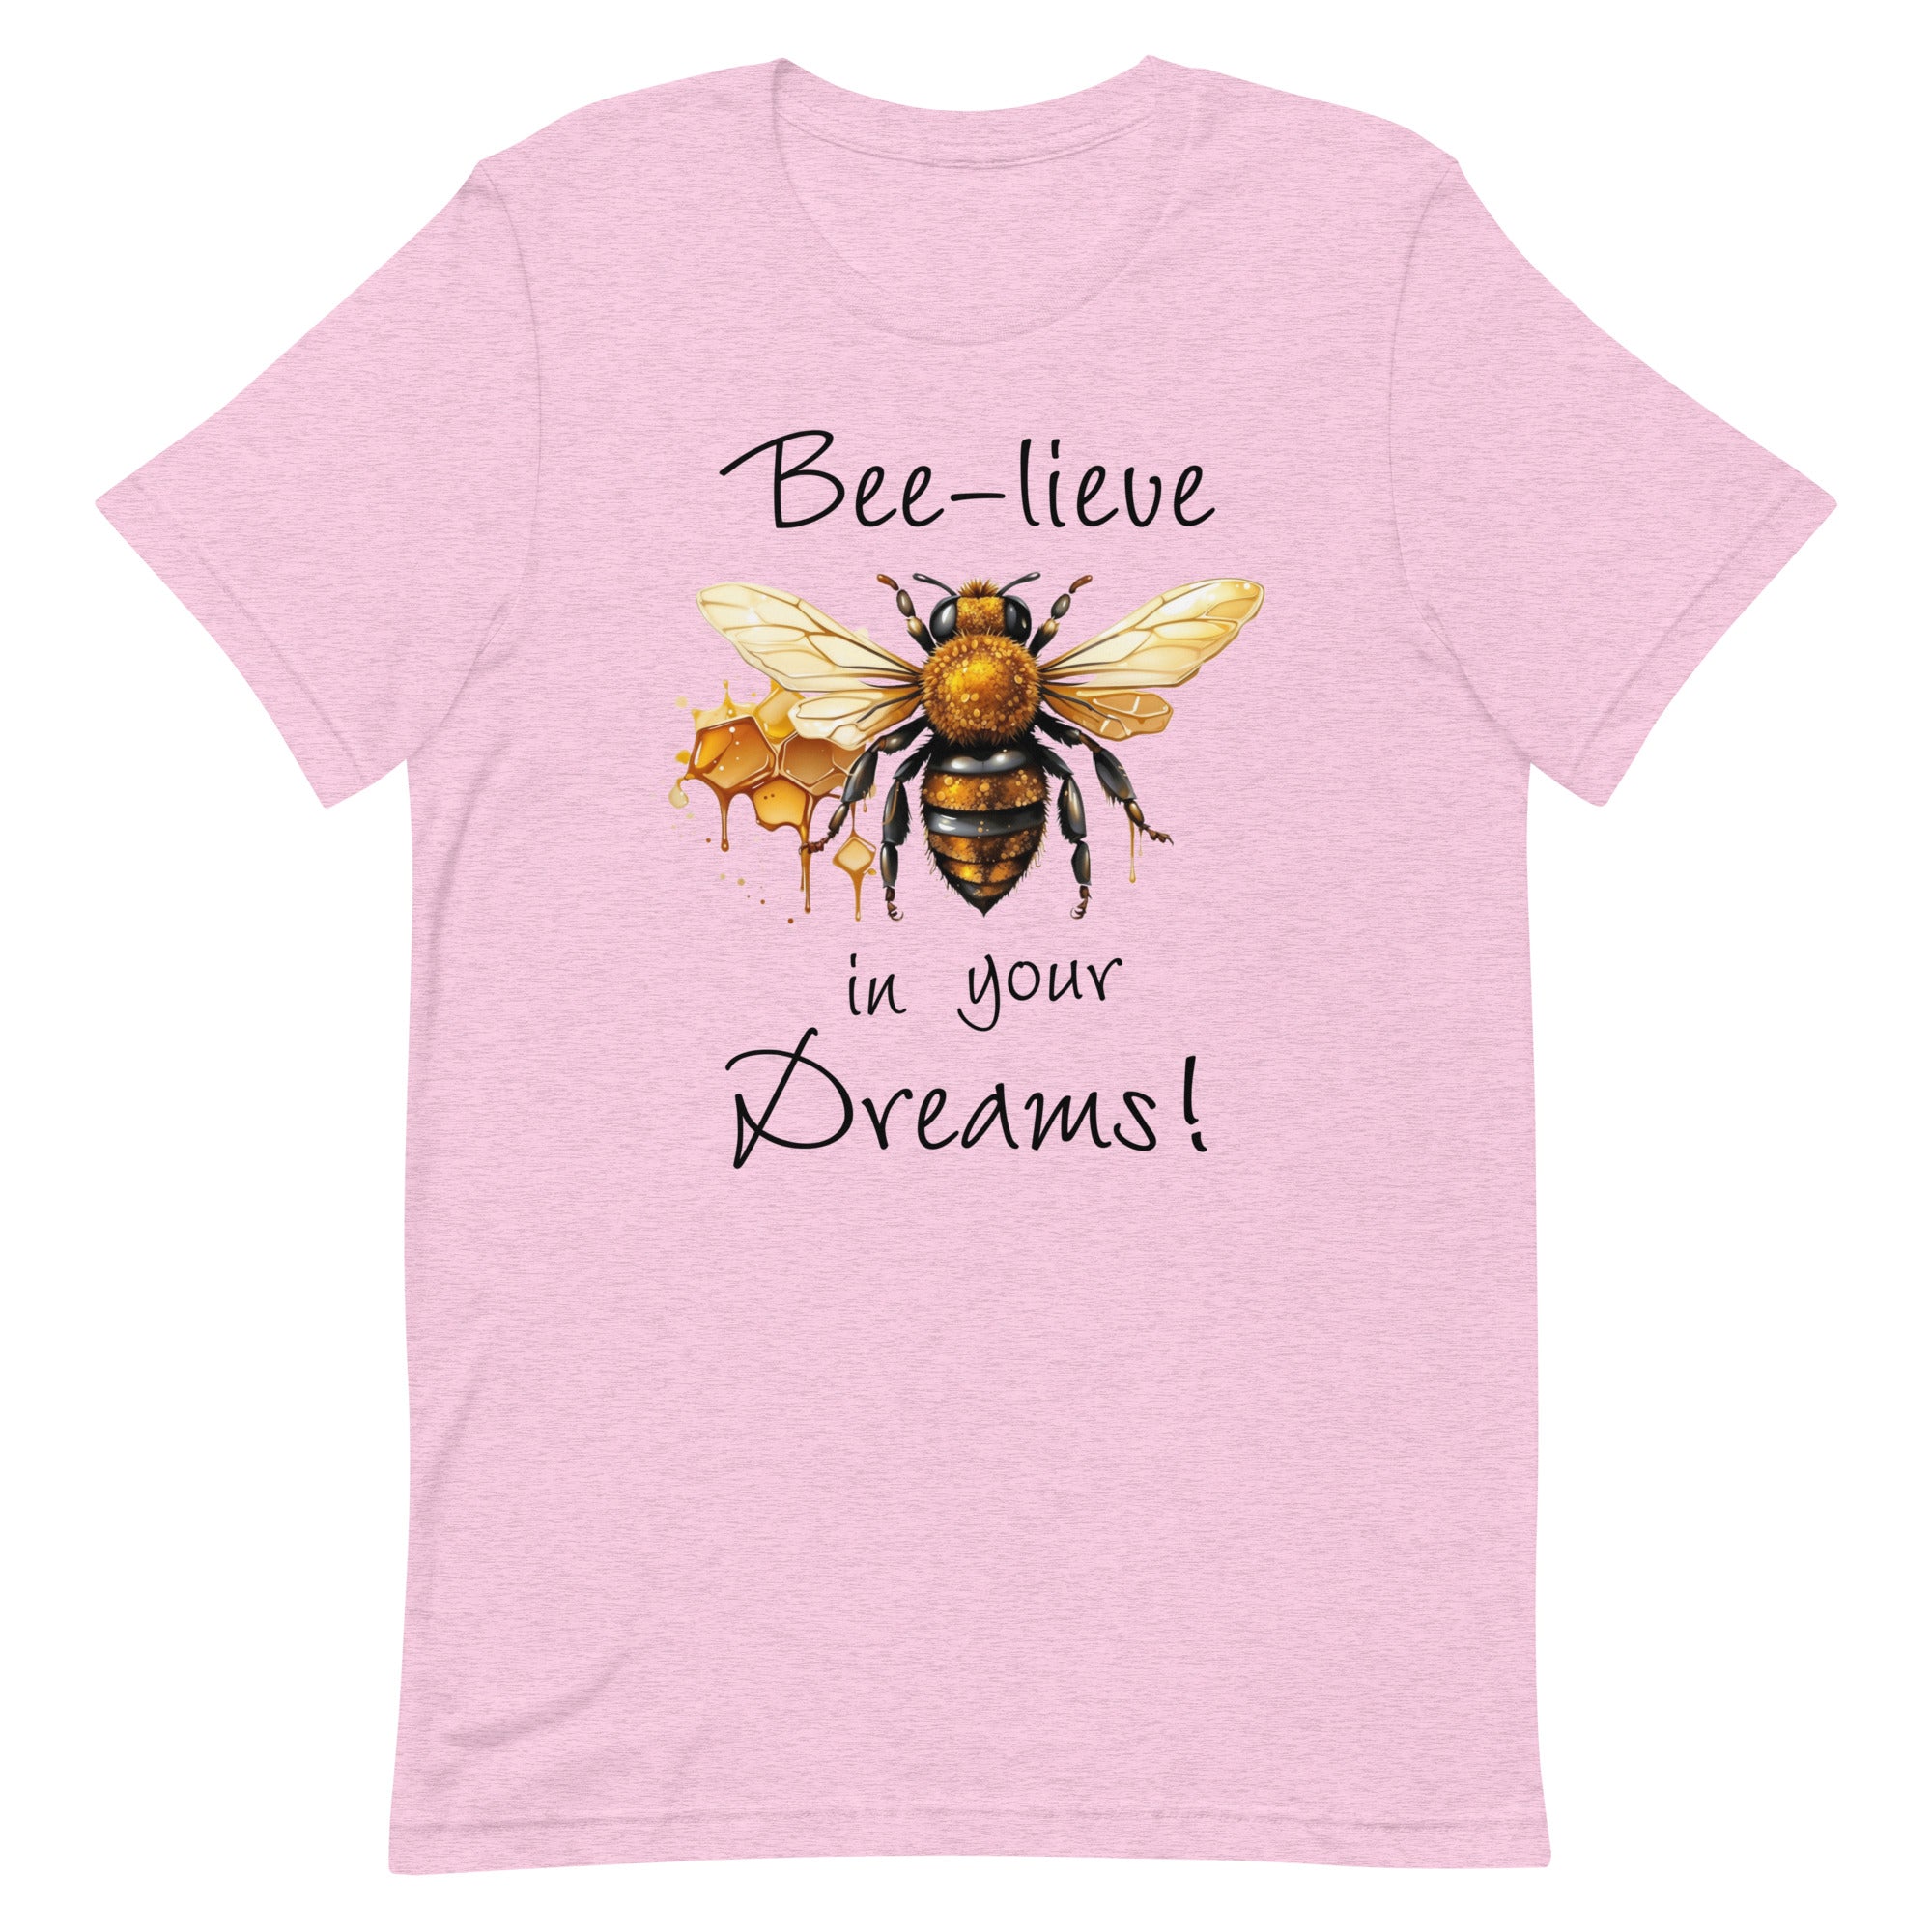 Bee-lieve in Your Dreams T-Shirt, Gift for Bee Lovers Heather Prism Lilac L XL S M DenBox